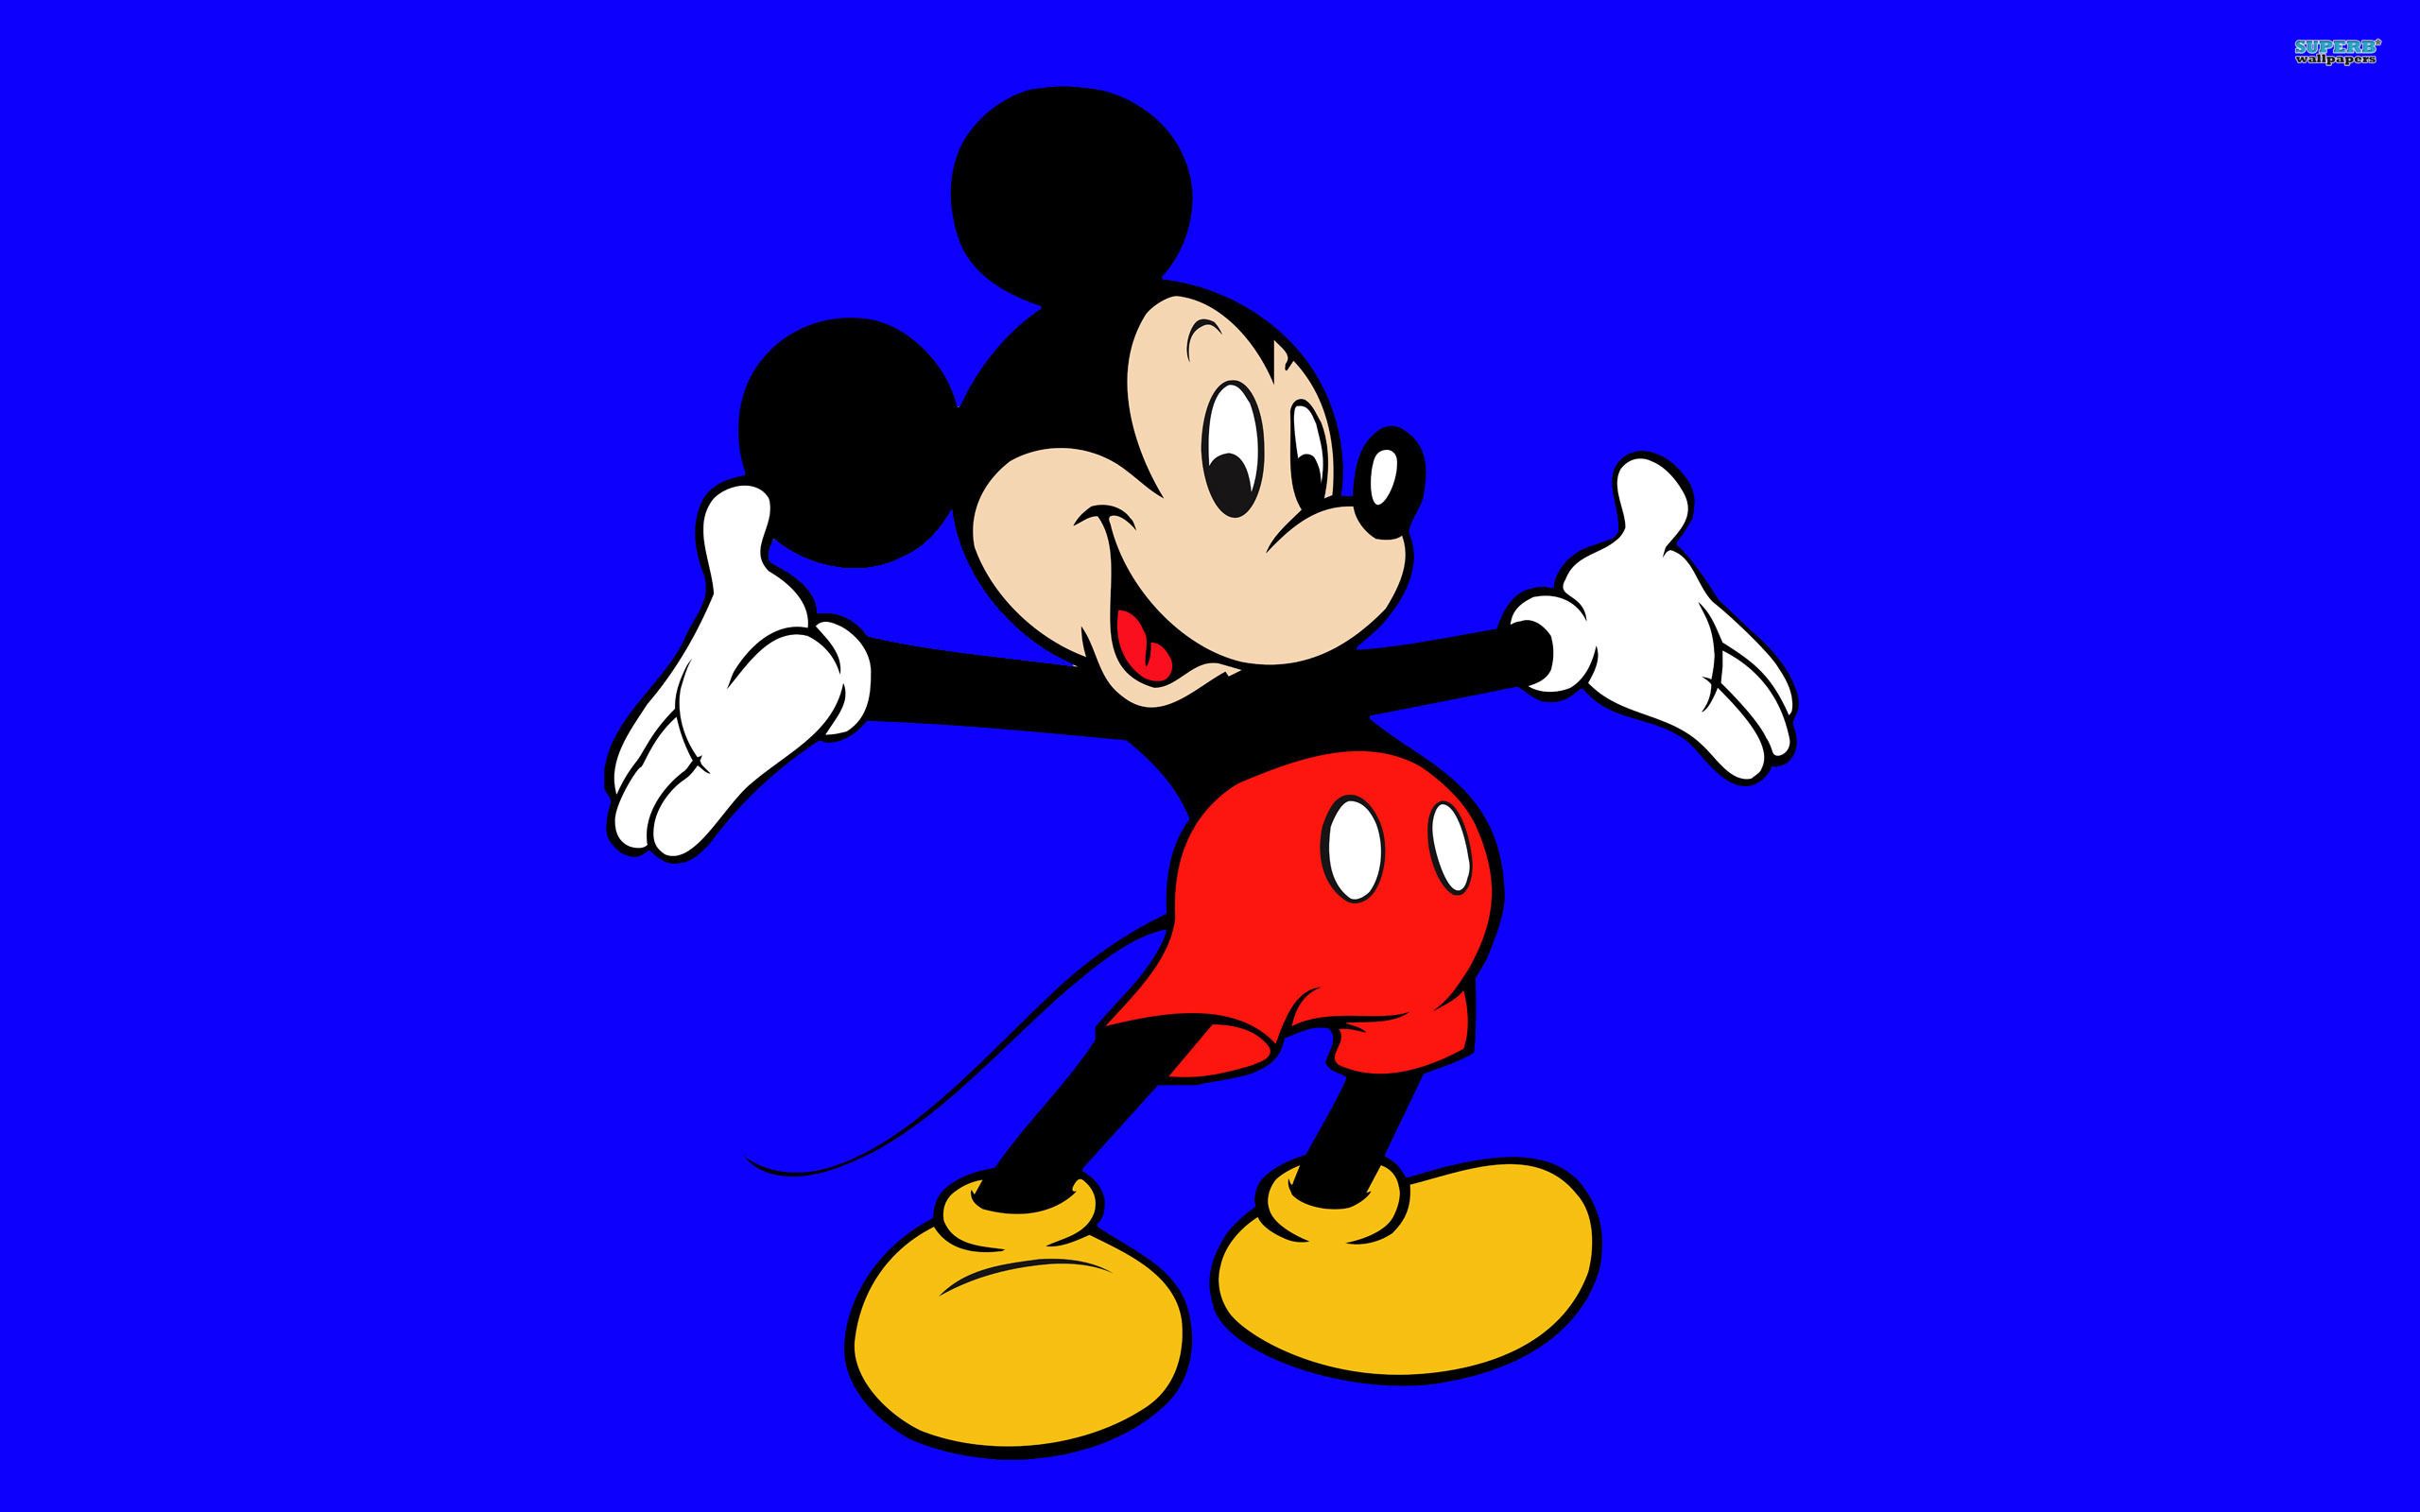 Mickey Mouse Wallpaper Backgrounds 16076 - HD Wallpapers Site